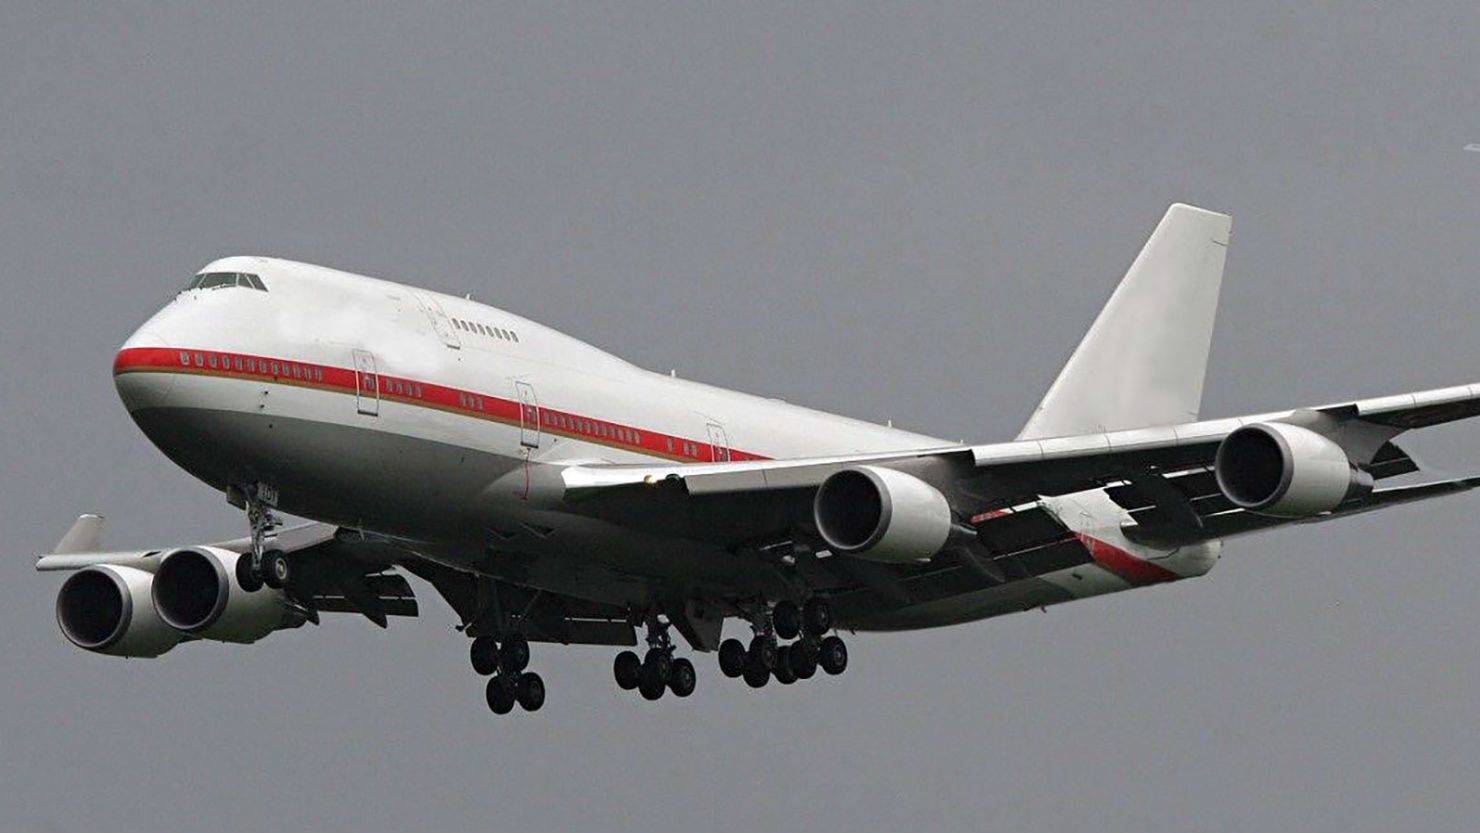 The modified Boeing 747-400 is listed at $28 million.